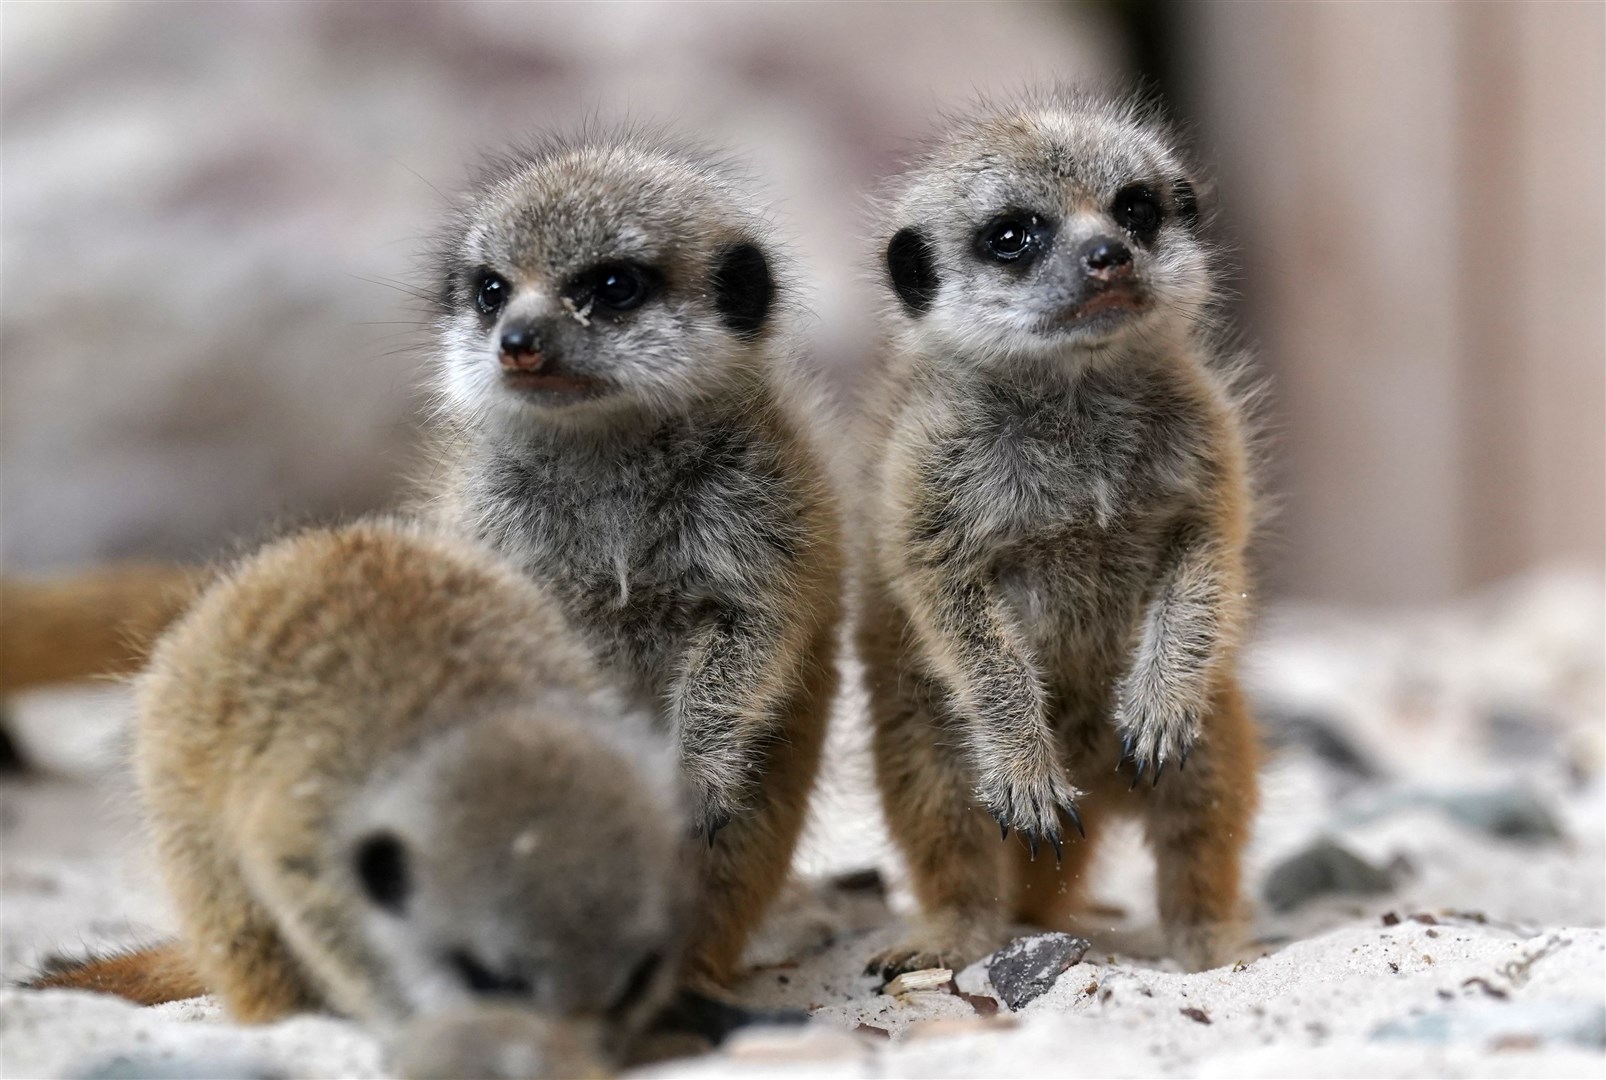 Meerkats are known for their strong social bonds (Andrew Milligan/PA)